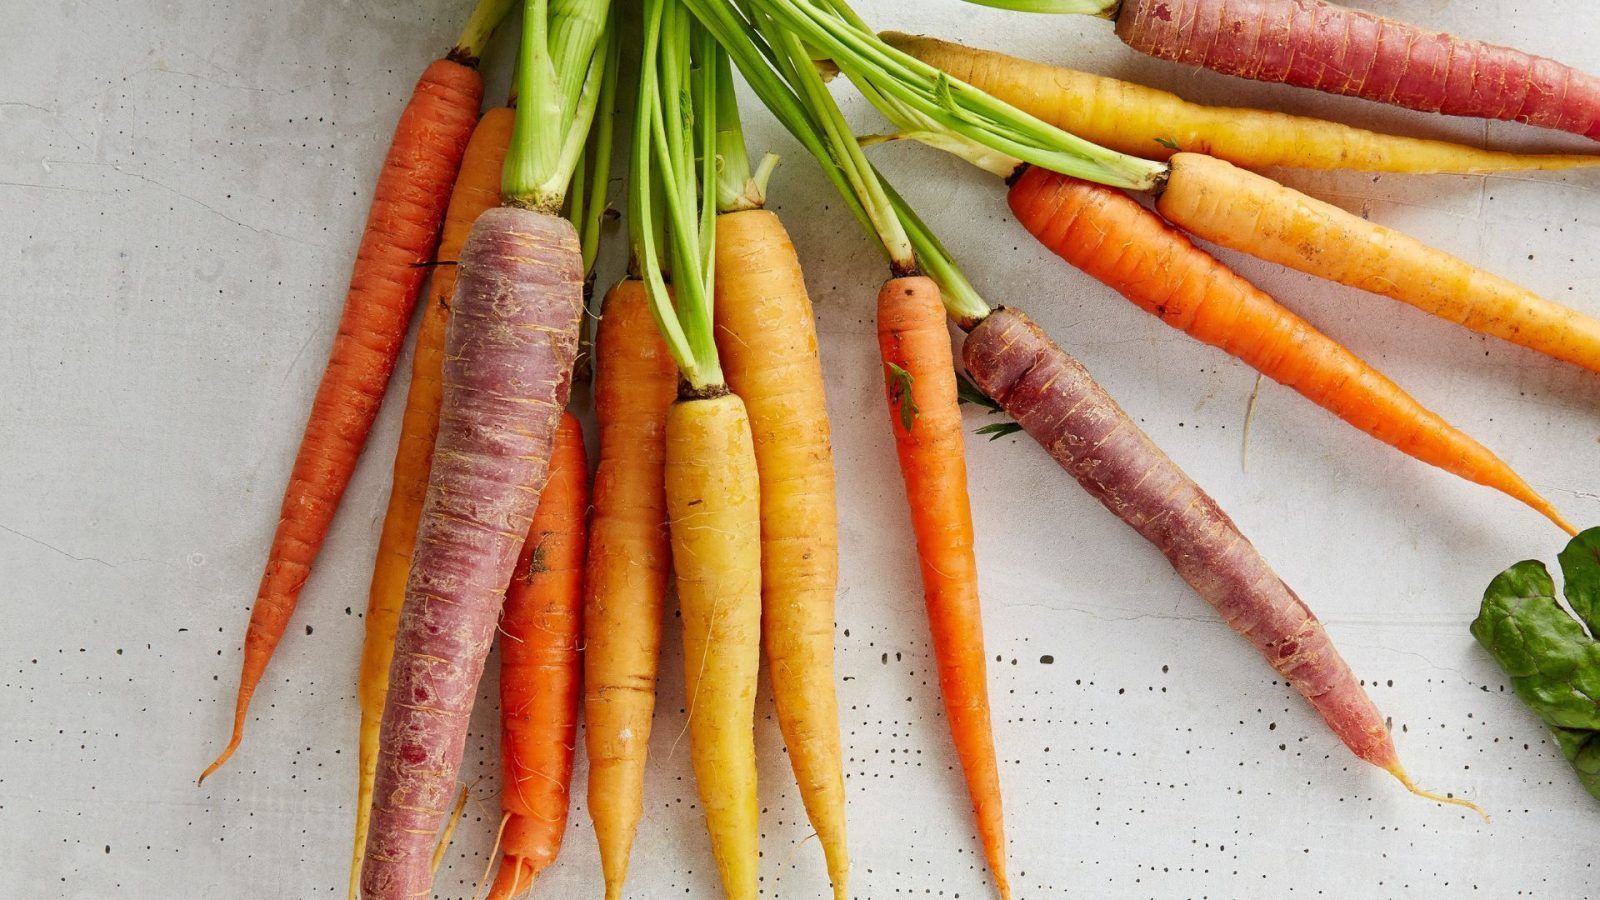 Carrot benefits: 7 reasons why it's good for your body